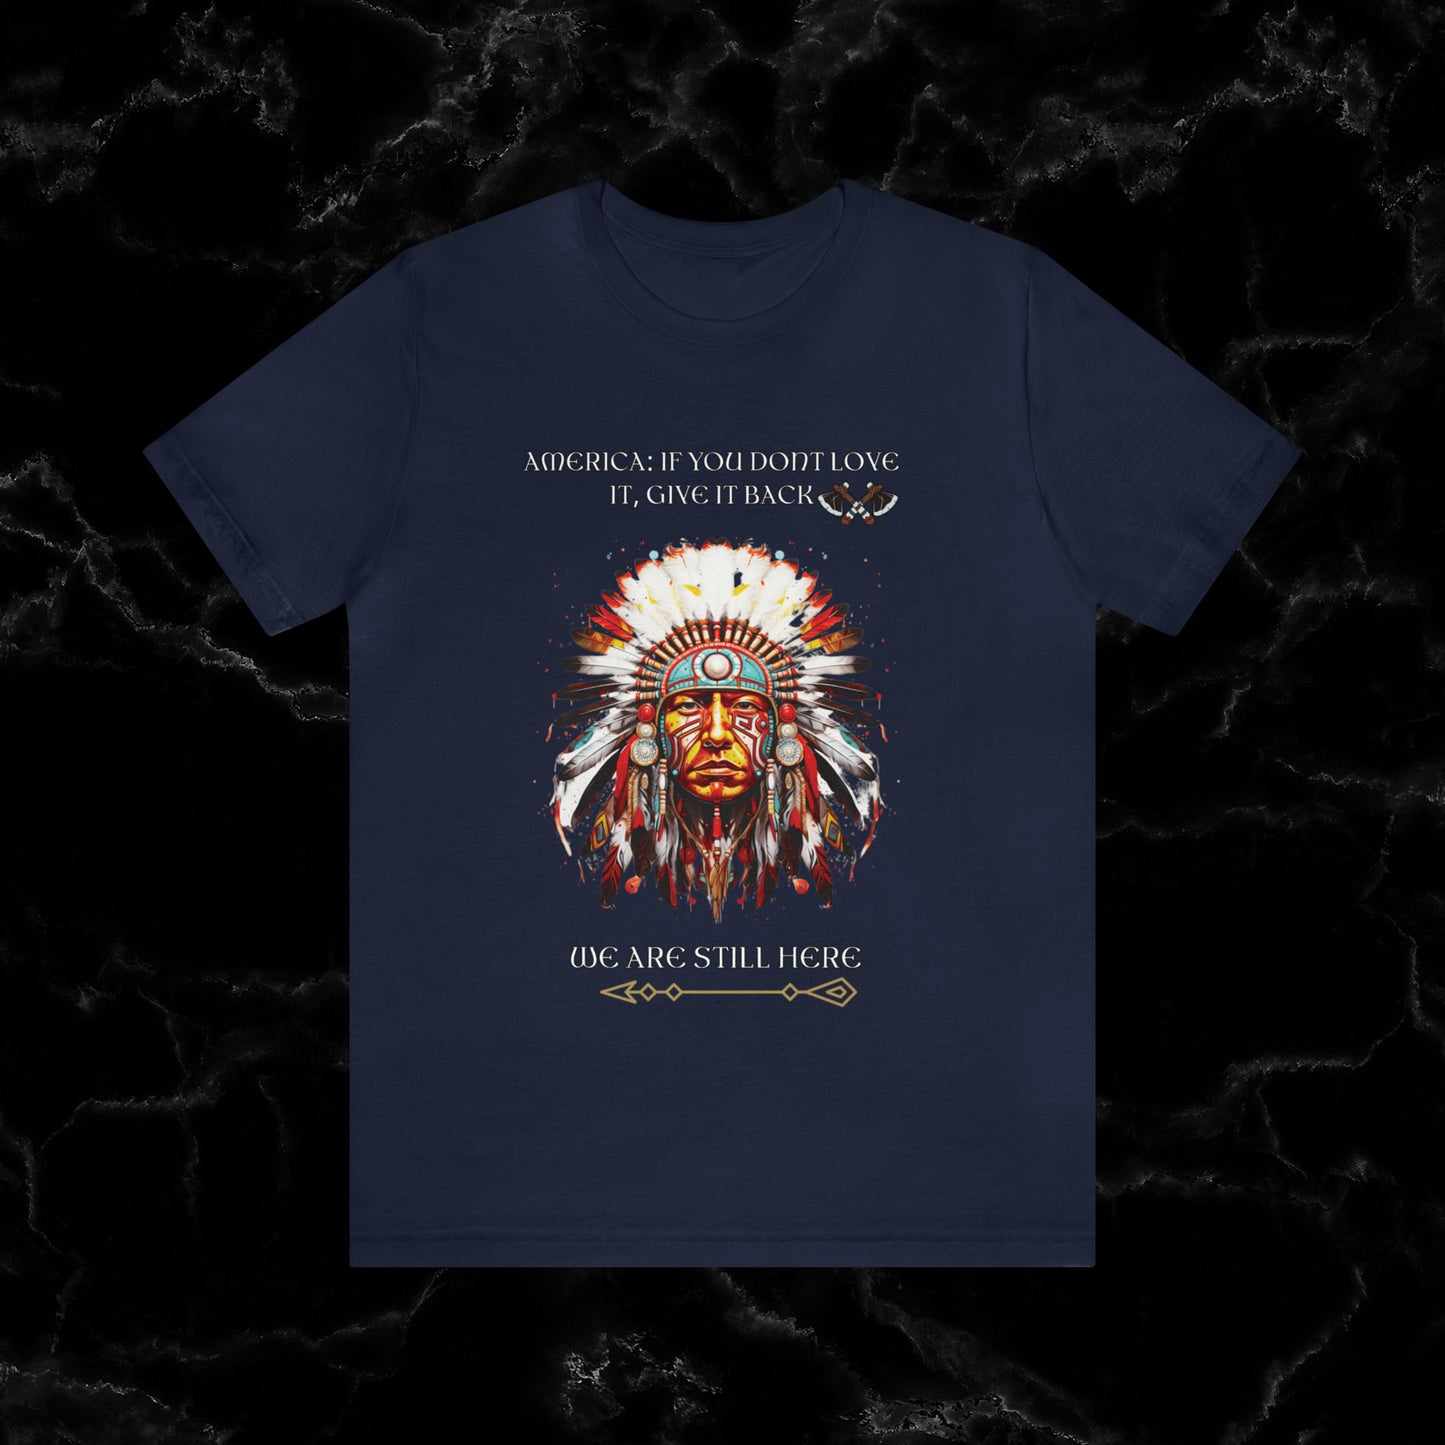 America Love it Or Give It Back Vintage T-Shirt - Indigenous Native Shirt T-Shirt Navy S 